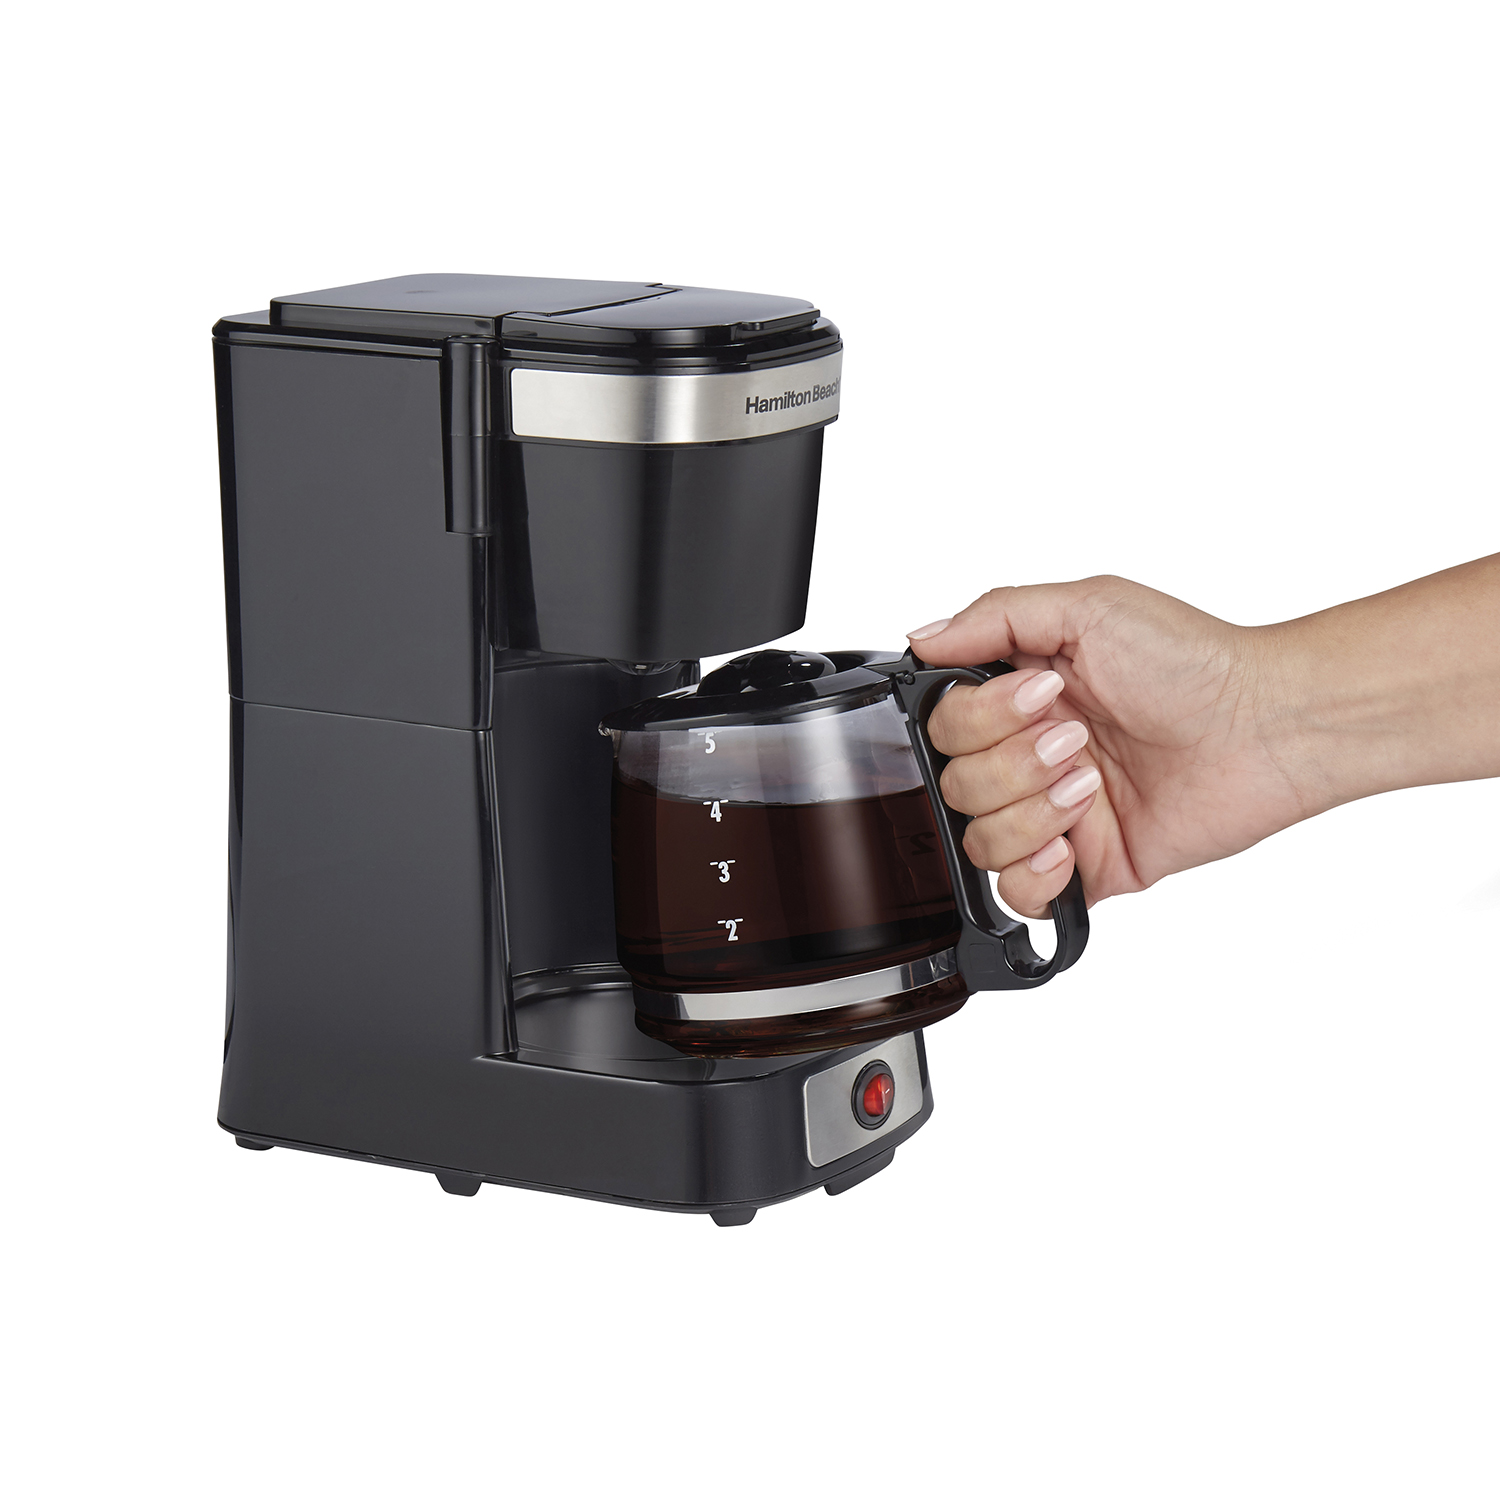 Hamilton Beach 5 Cup Compact Coffee Maker with Glass